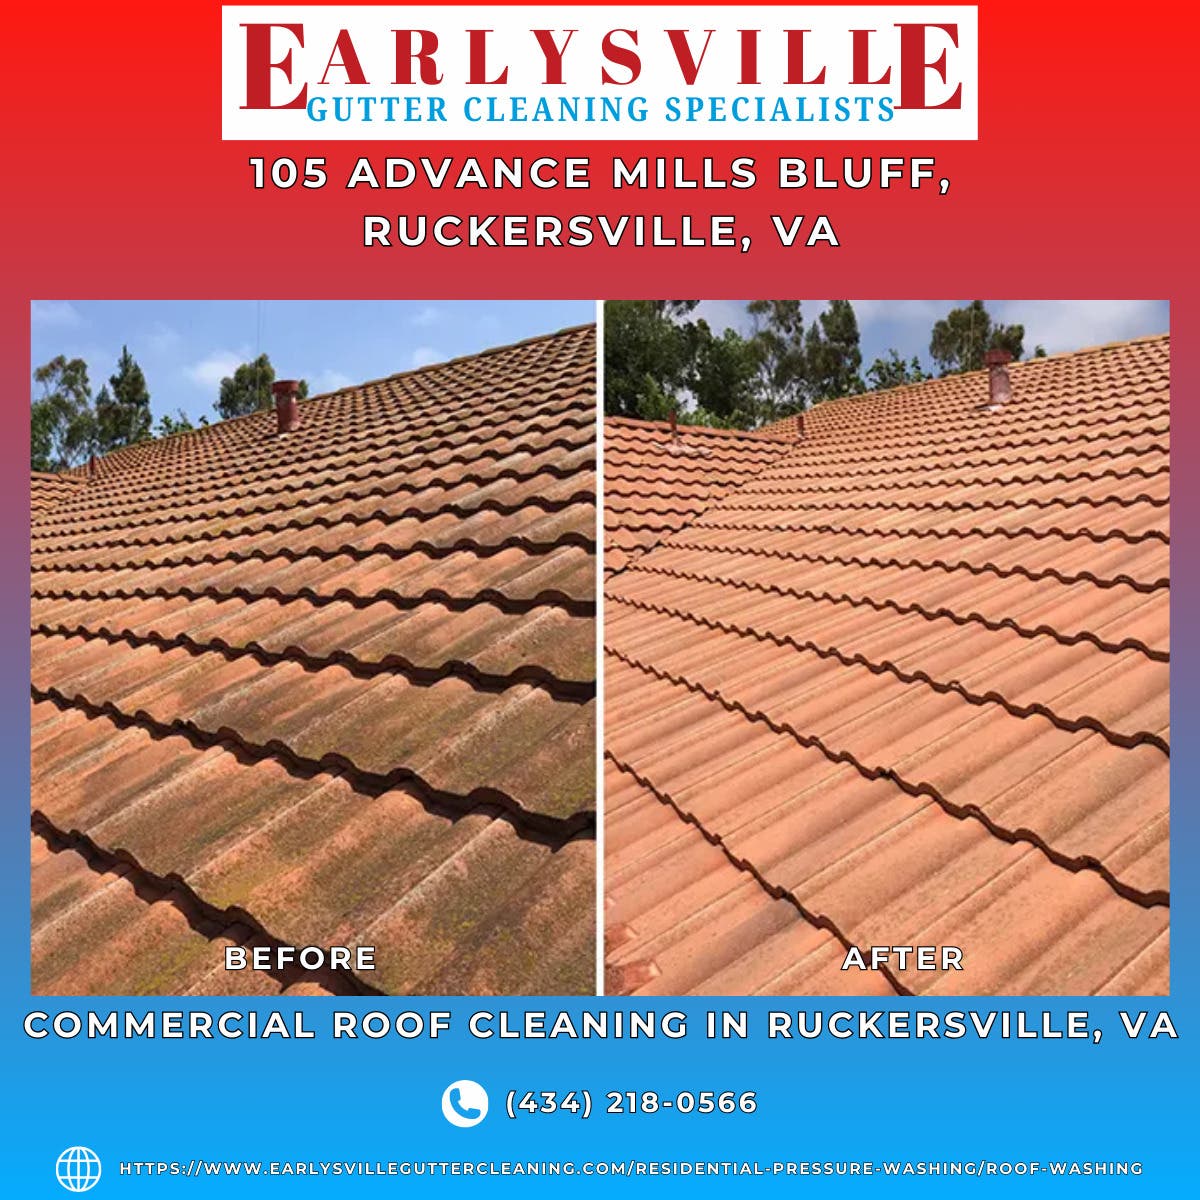 Commercial Roof Cleaning in Ruckersville, VA - Earlysville Gutter Cleaning Specialists